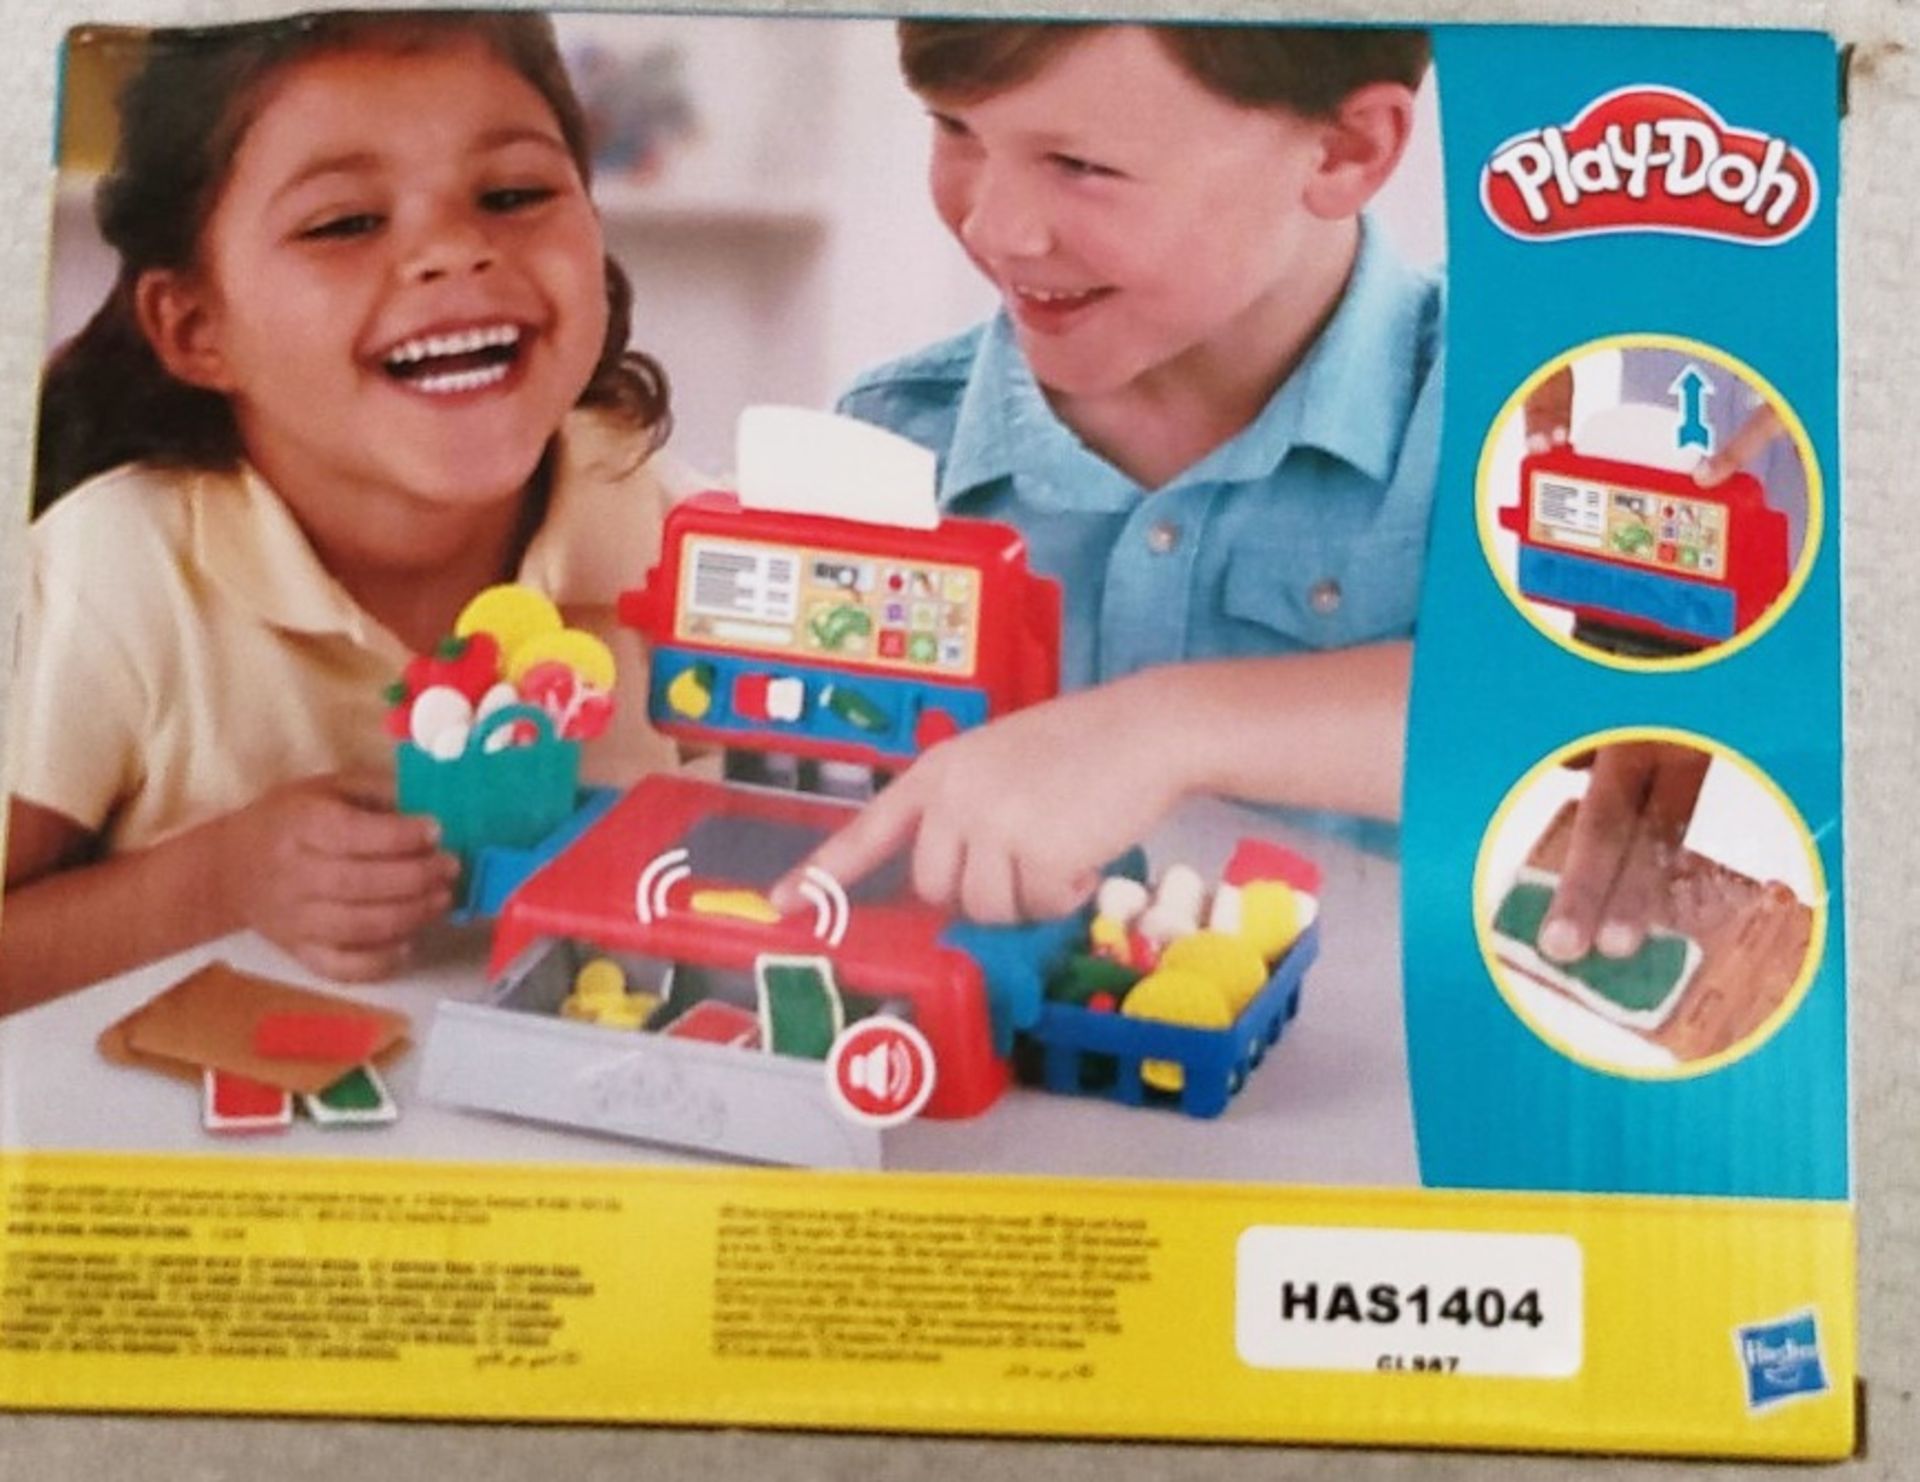 1 x PLAY DOH Cash Register E6890 - Unused Boxed Stock - Image 5 of 5